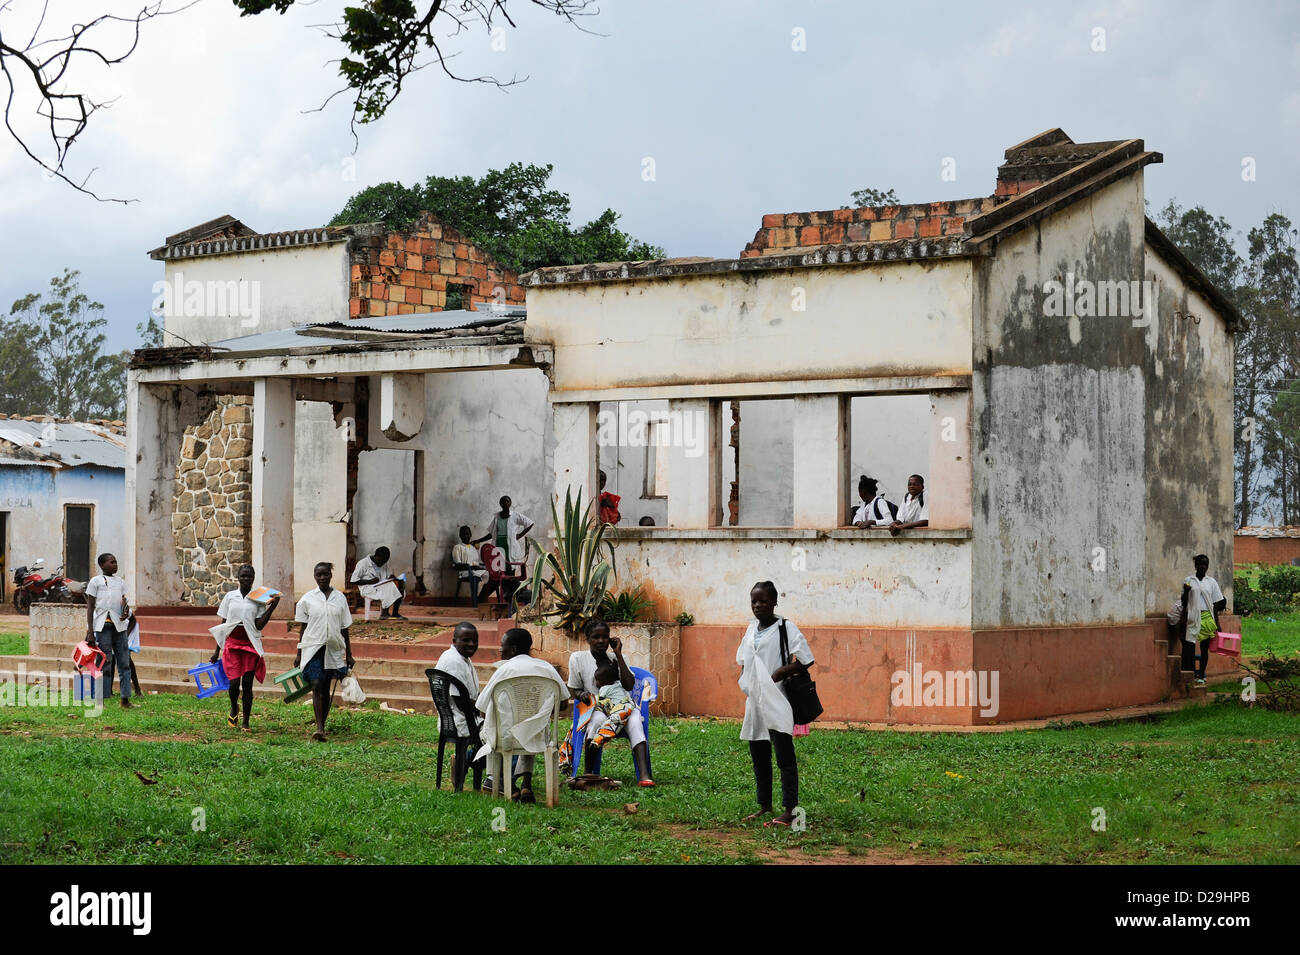 ANGOLA Kwanza Sul, children in during civil war destroyed school building in village Sao Pedro, due to corruption there are no funds from the government for reconstruction Stock Photo